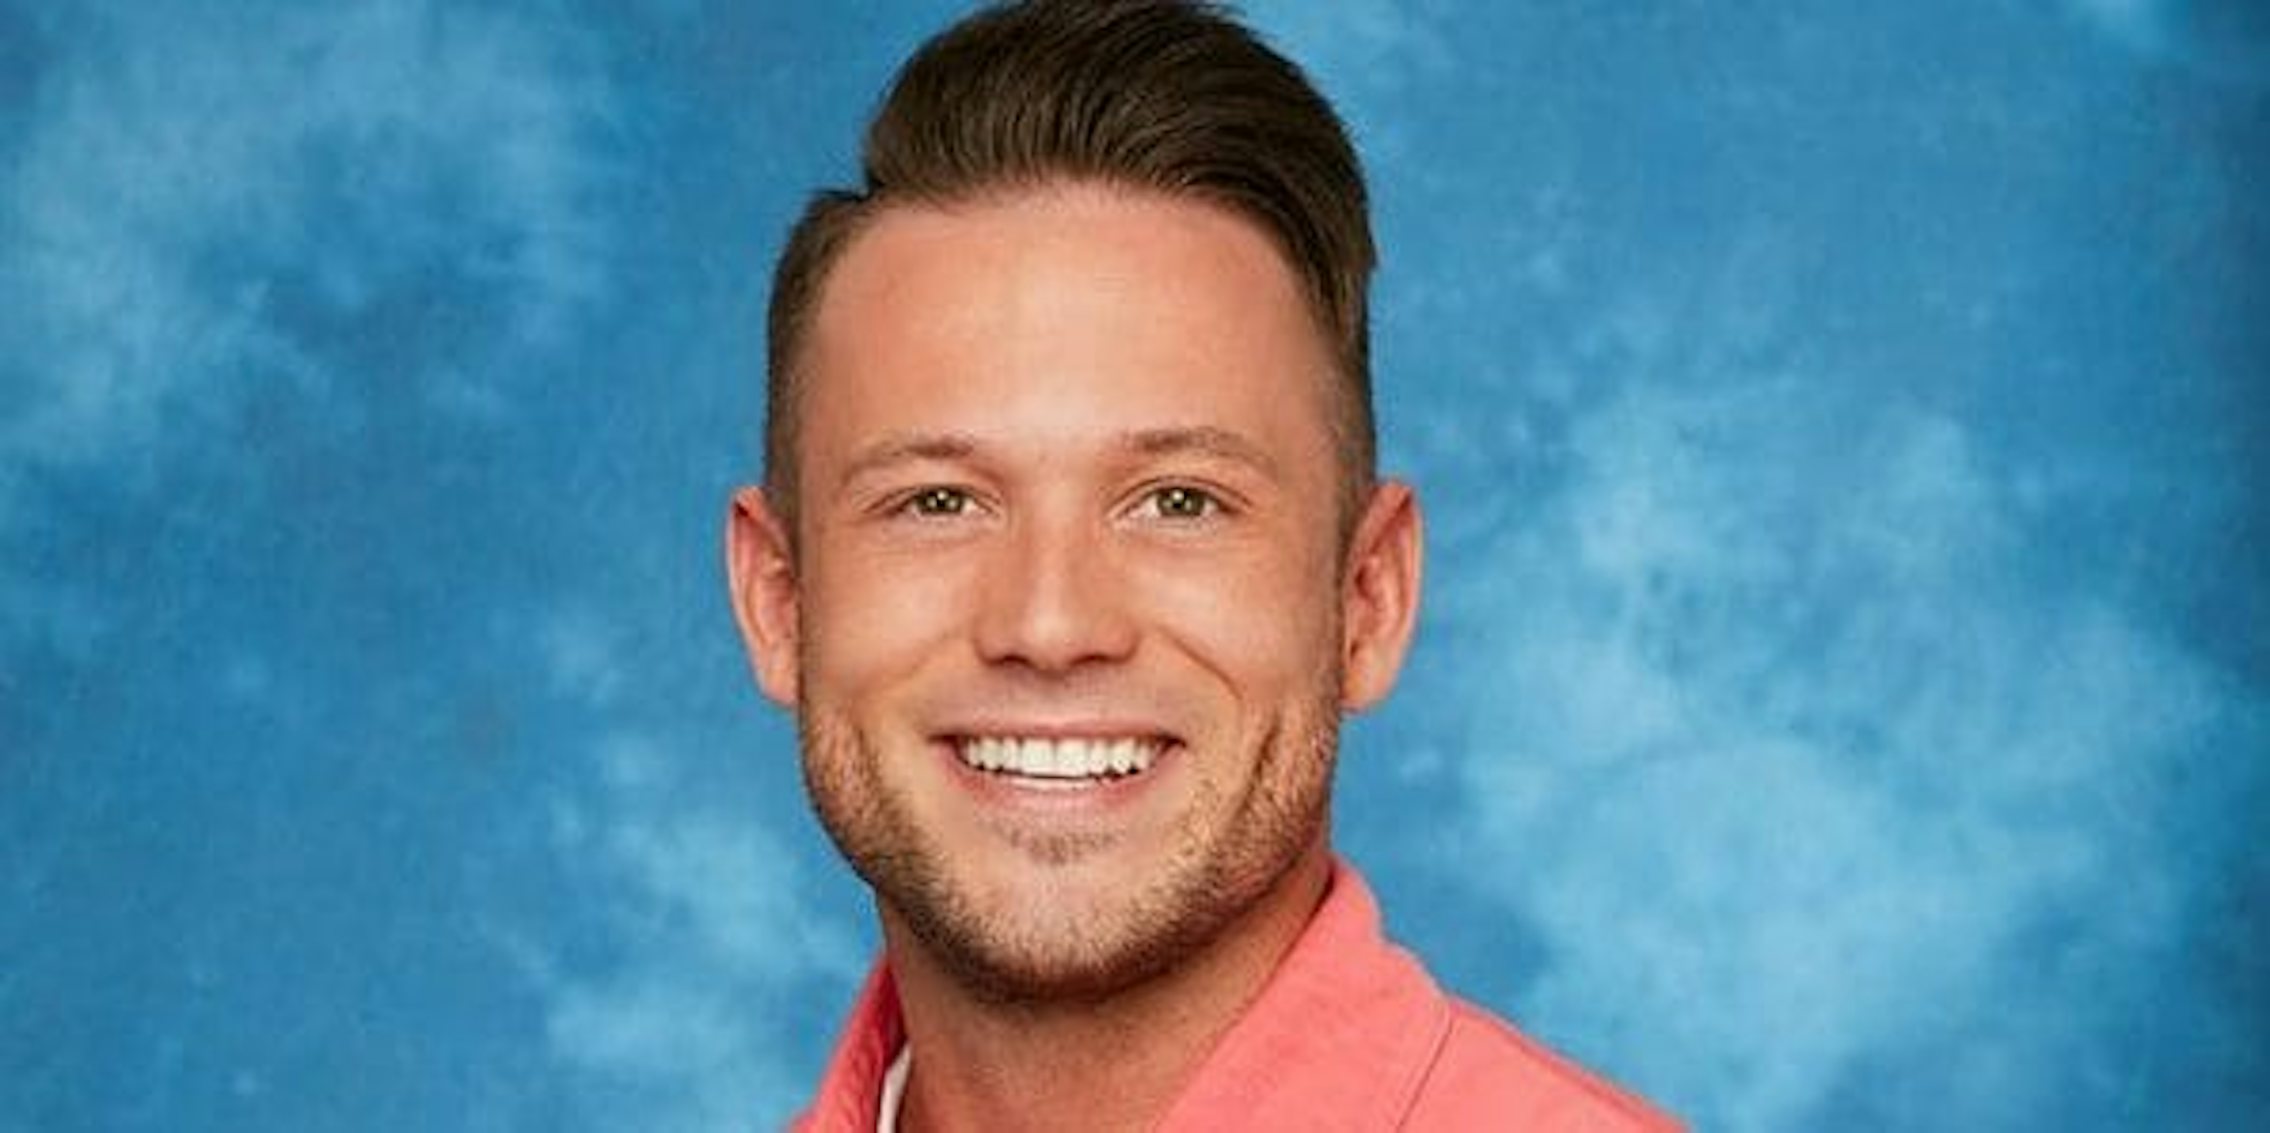 Bachelorette Contestant In Hot Water For Racist Tweets